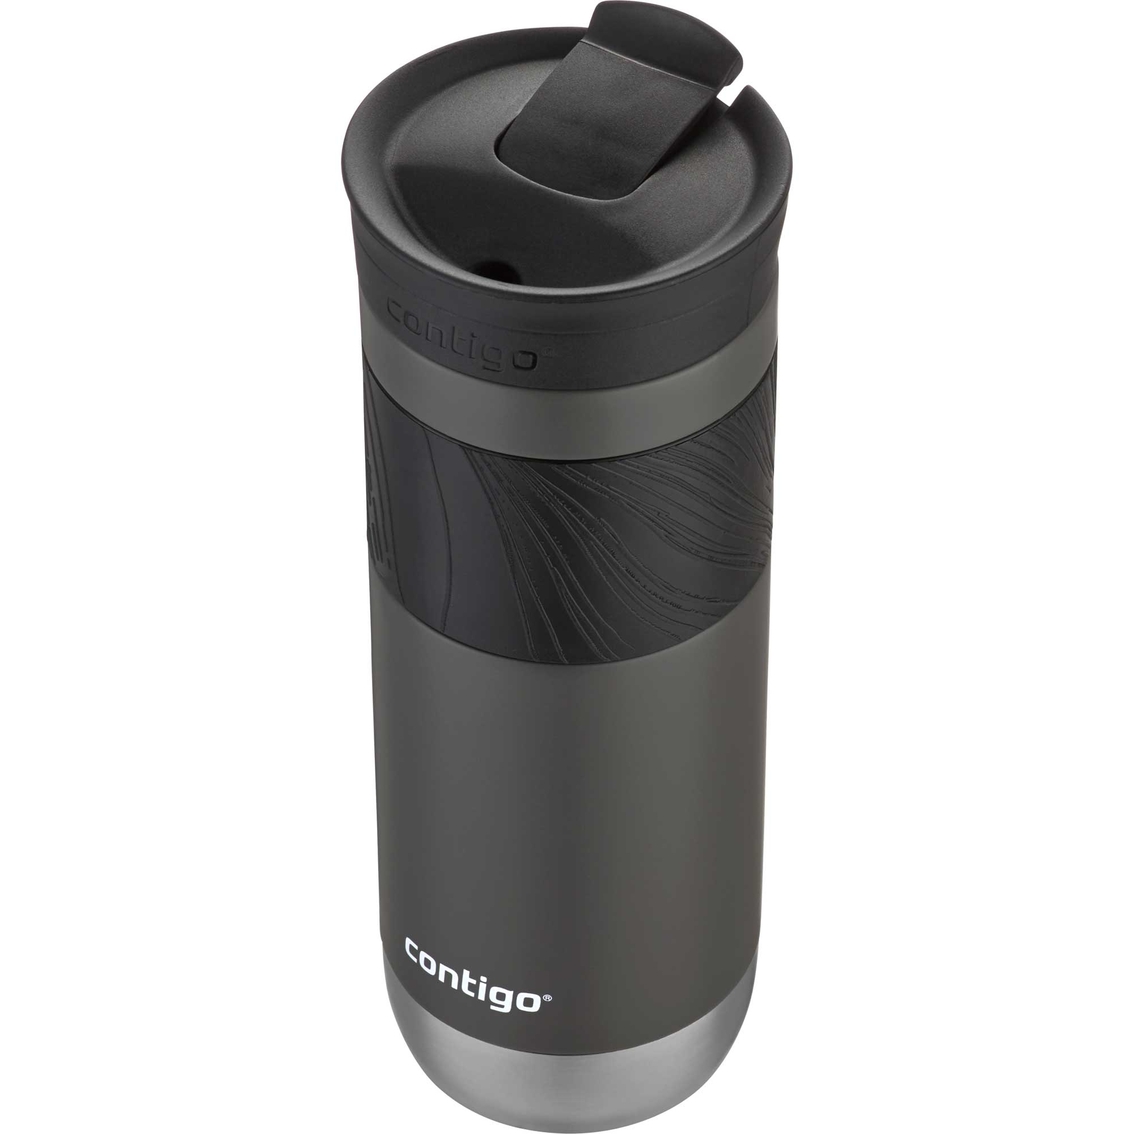 Contigo Couture SnapSeal Insulated Stainless Steel 20 oz. Travel Mug with Grip - Image 4 of 4